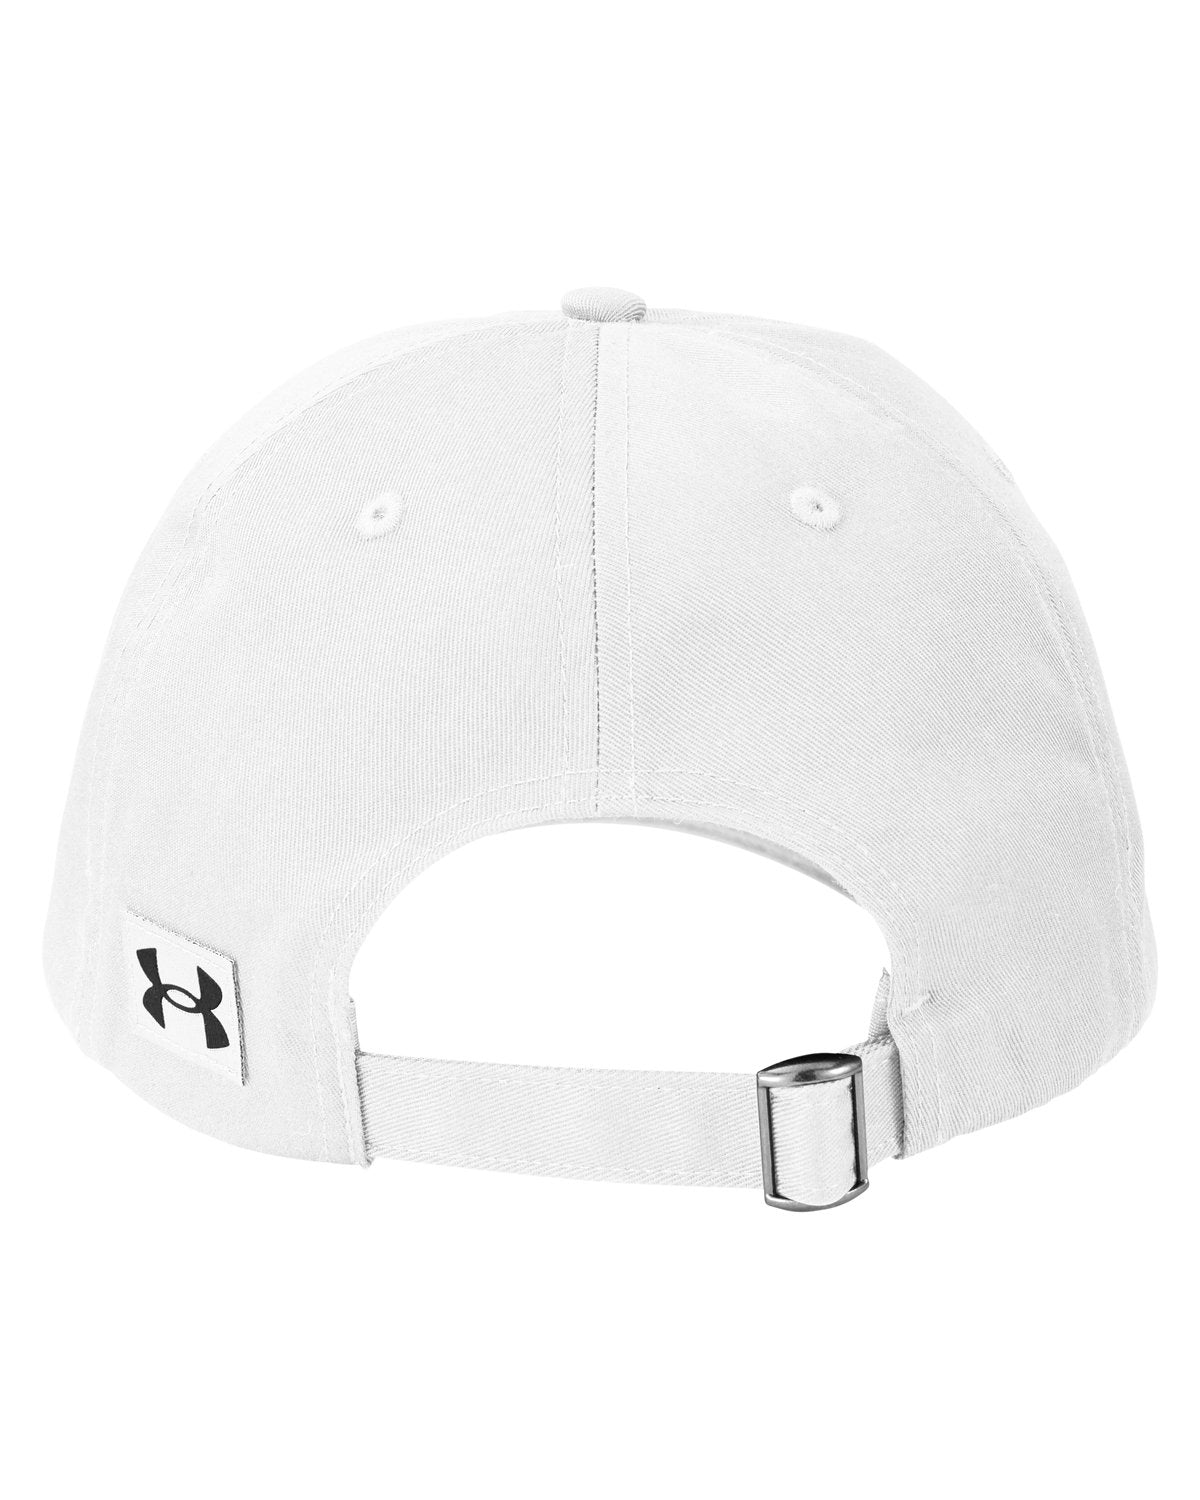 Under Armour 1369785 Hat with Custom Embroidery